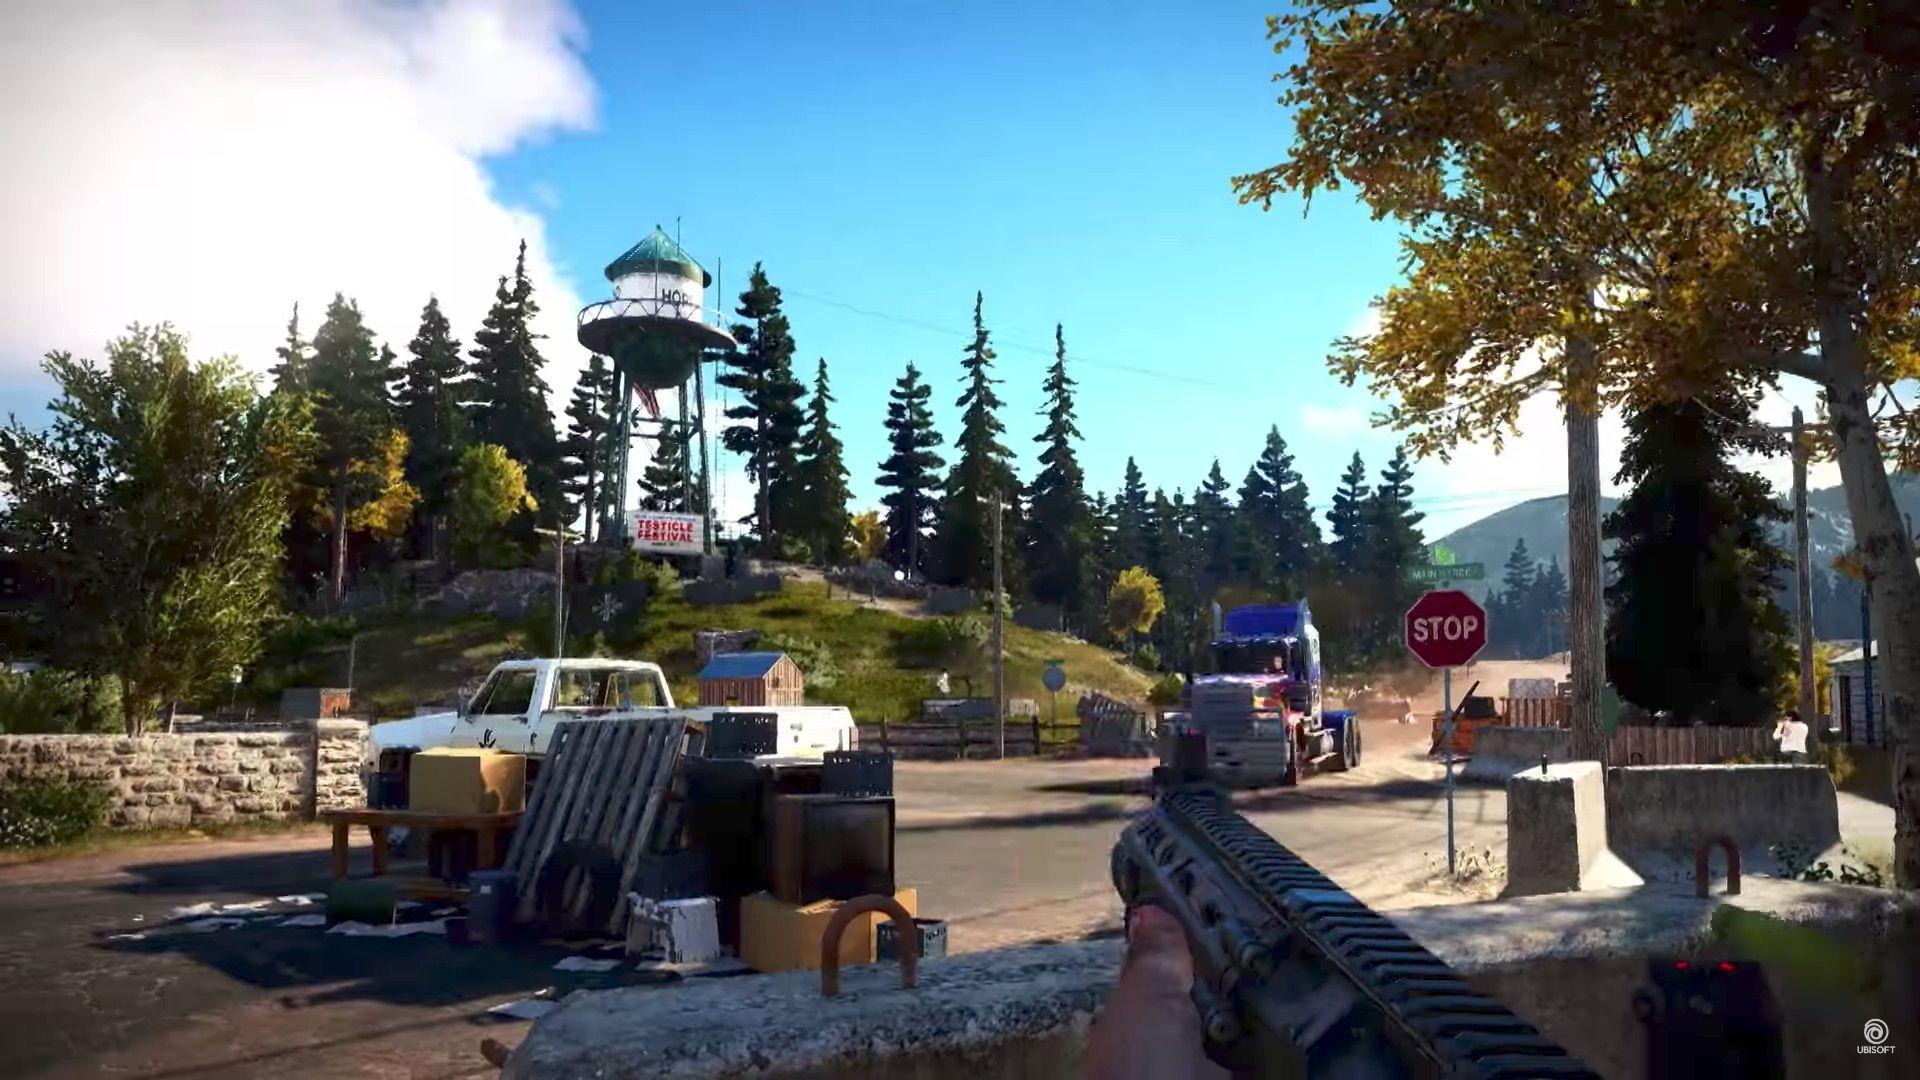 Far Cry 5's love of unpredictable violence is too damn exhausting